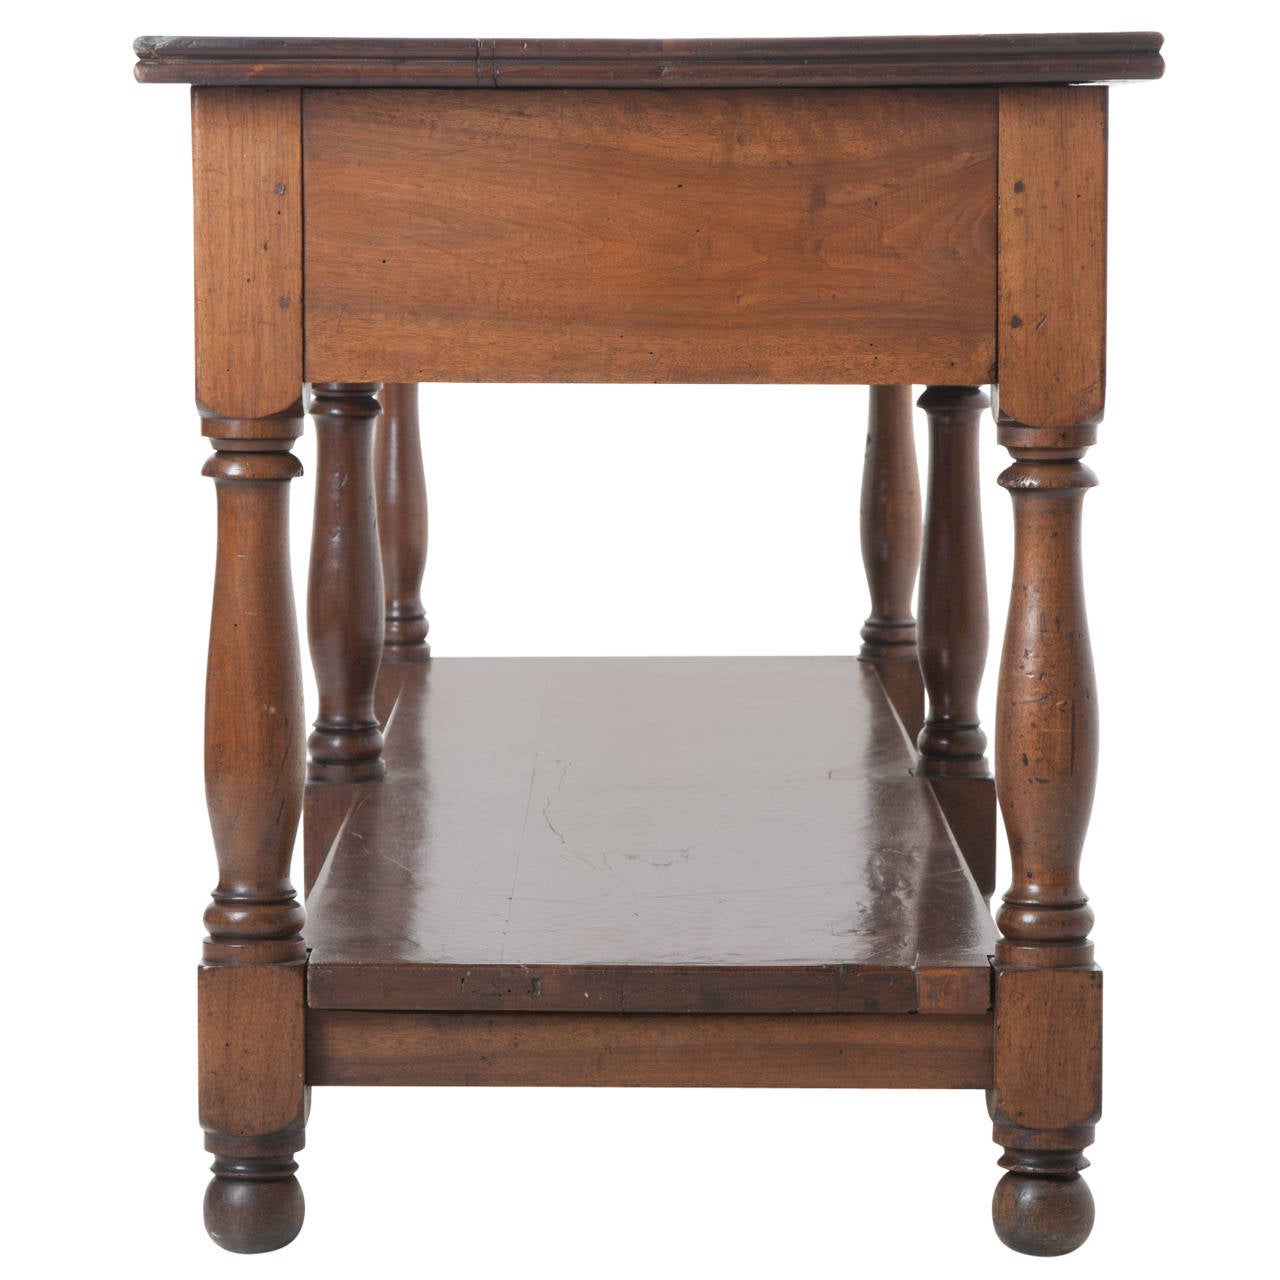 French gorgeous walnut, hand pegged drapers table. Drapers tables were used by a seamstress when laying out fabric for custom drapes. This Fine antique has a thick top and can lift off from its base. Two healthy drawers are on one side of the deep